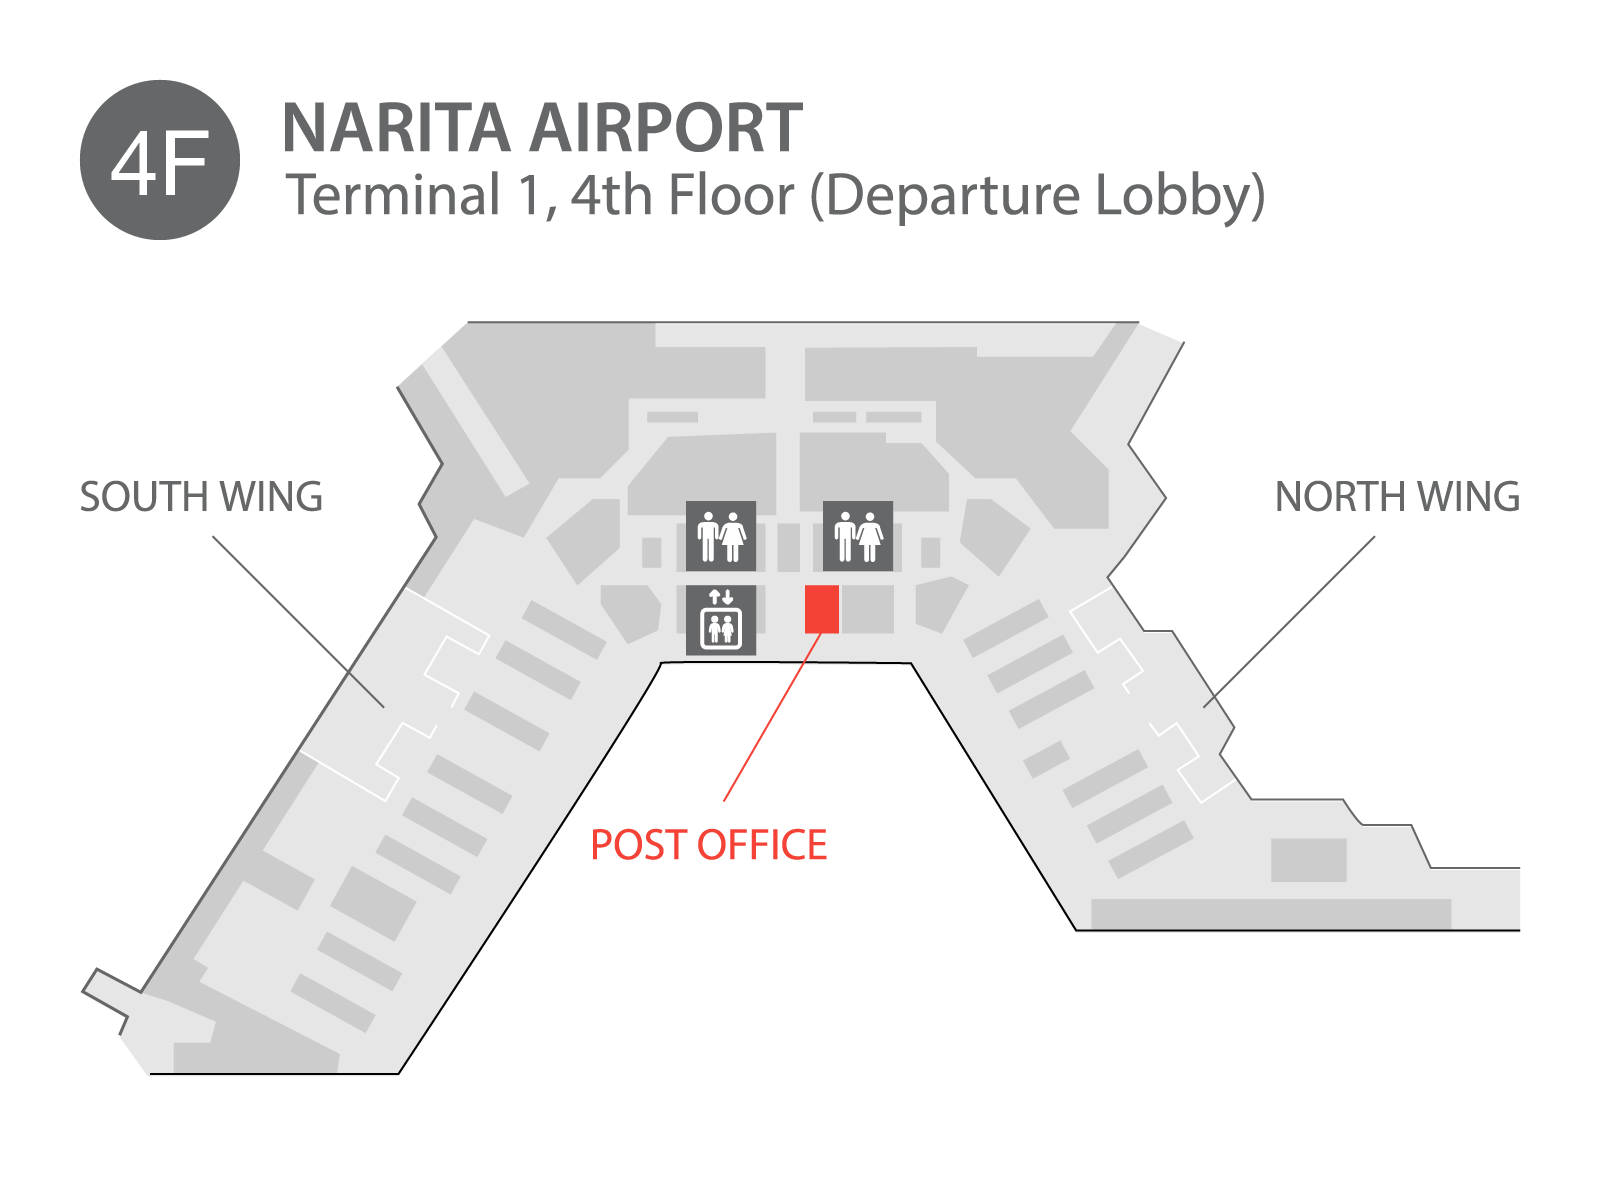 Narita Airport Terminal 1 - Narita airport Terminal 1 located on 4th floor.